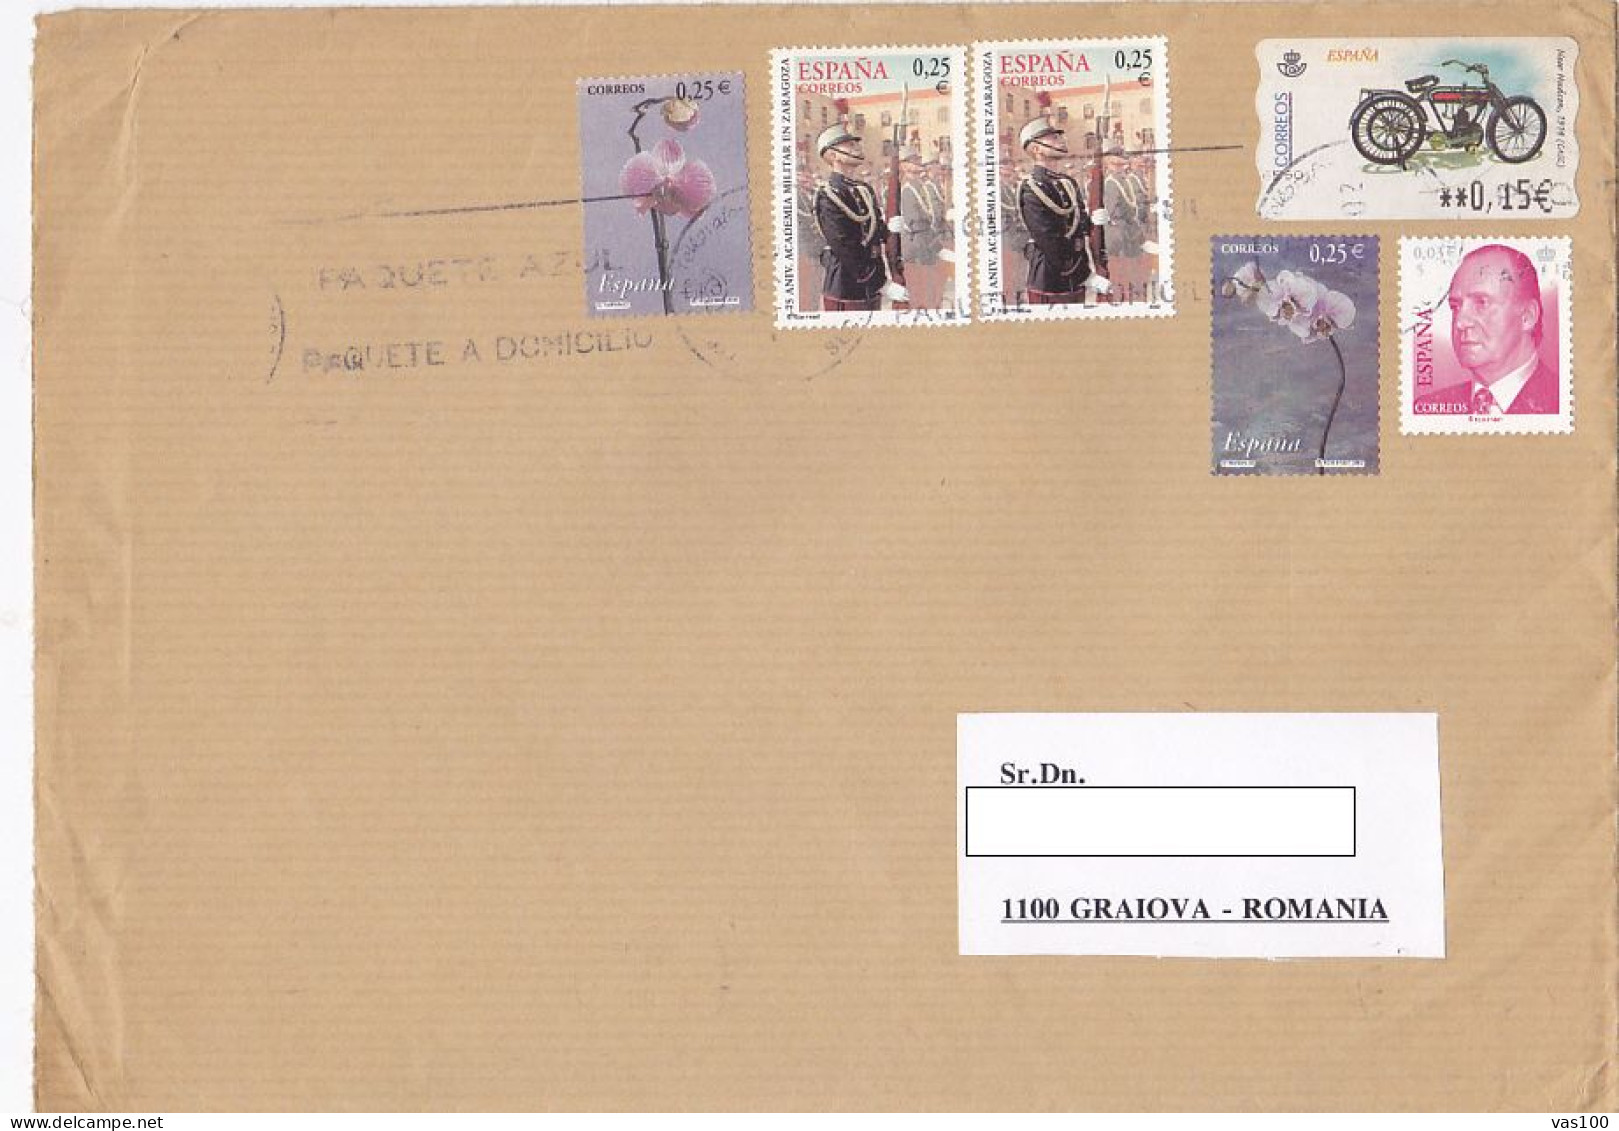 ORCHIDS, ZARAGOZA MILITARY ACADEMY, KING JUAN CARLOS, MOTORBIKE, STAMPS ON COVER, 2002, SPAIN - Cartas & Documentos